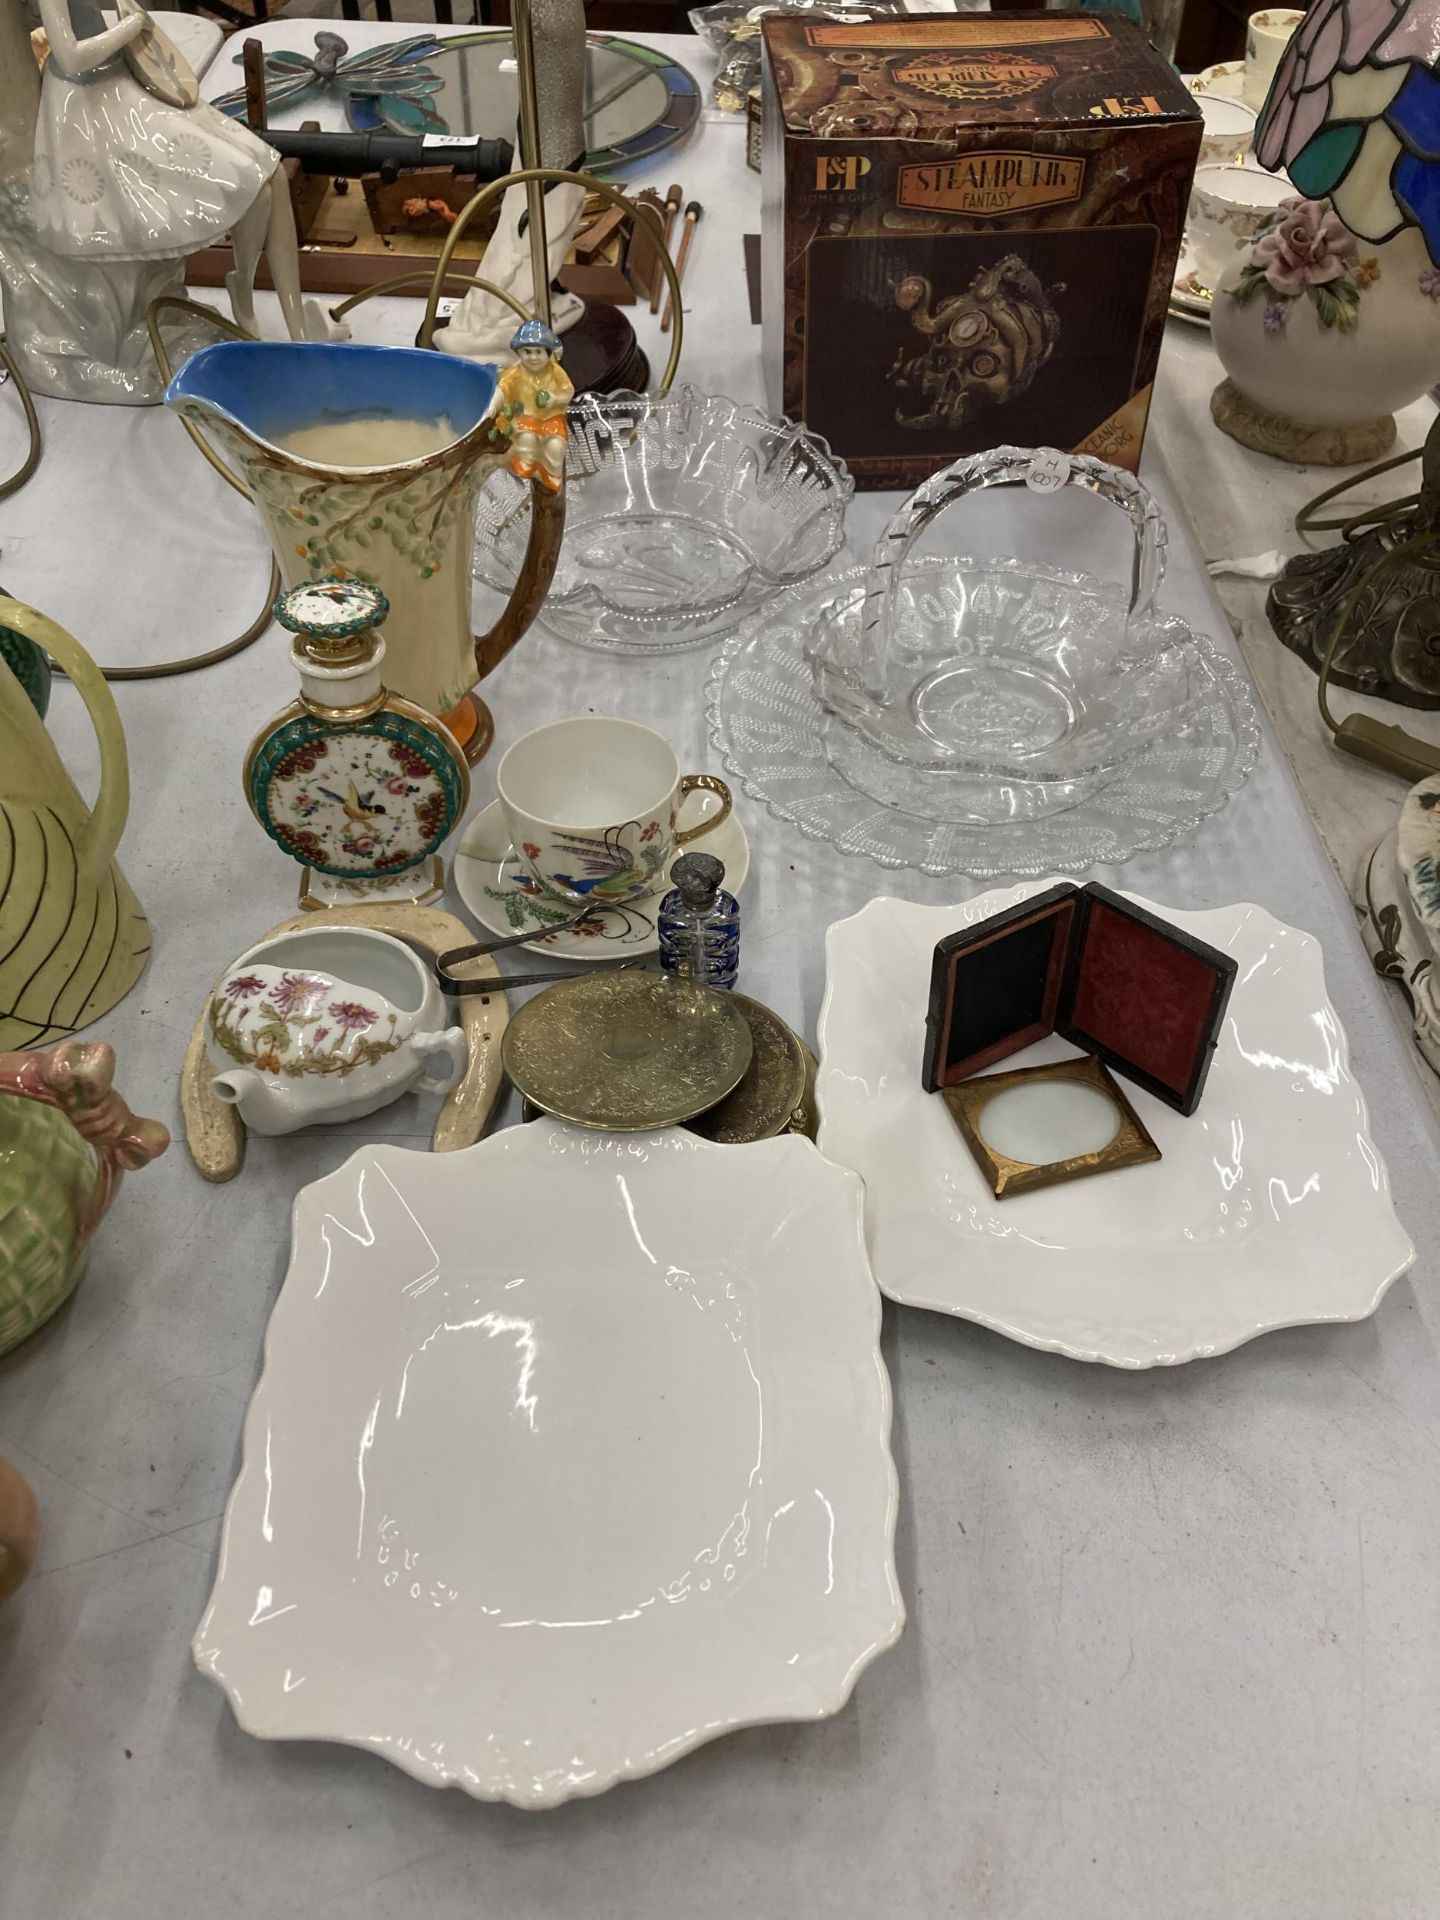 A MIXED VINTAGE LOT TO INCLUDE A MYOTT'S ART DECO JUG, GLASSWARE, A JAPANESE CUP AND SAUCER WITH